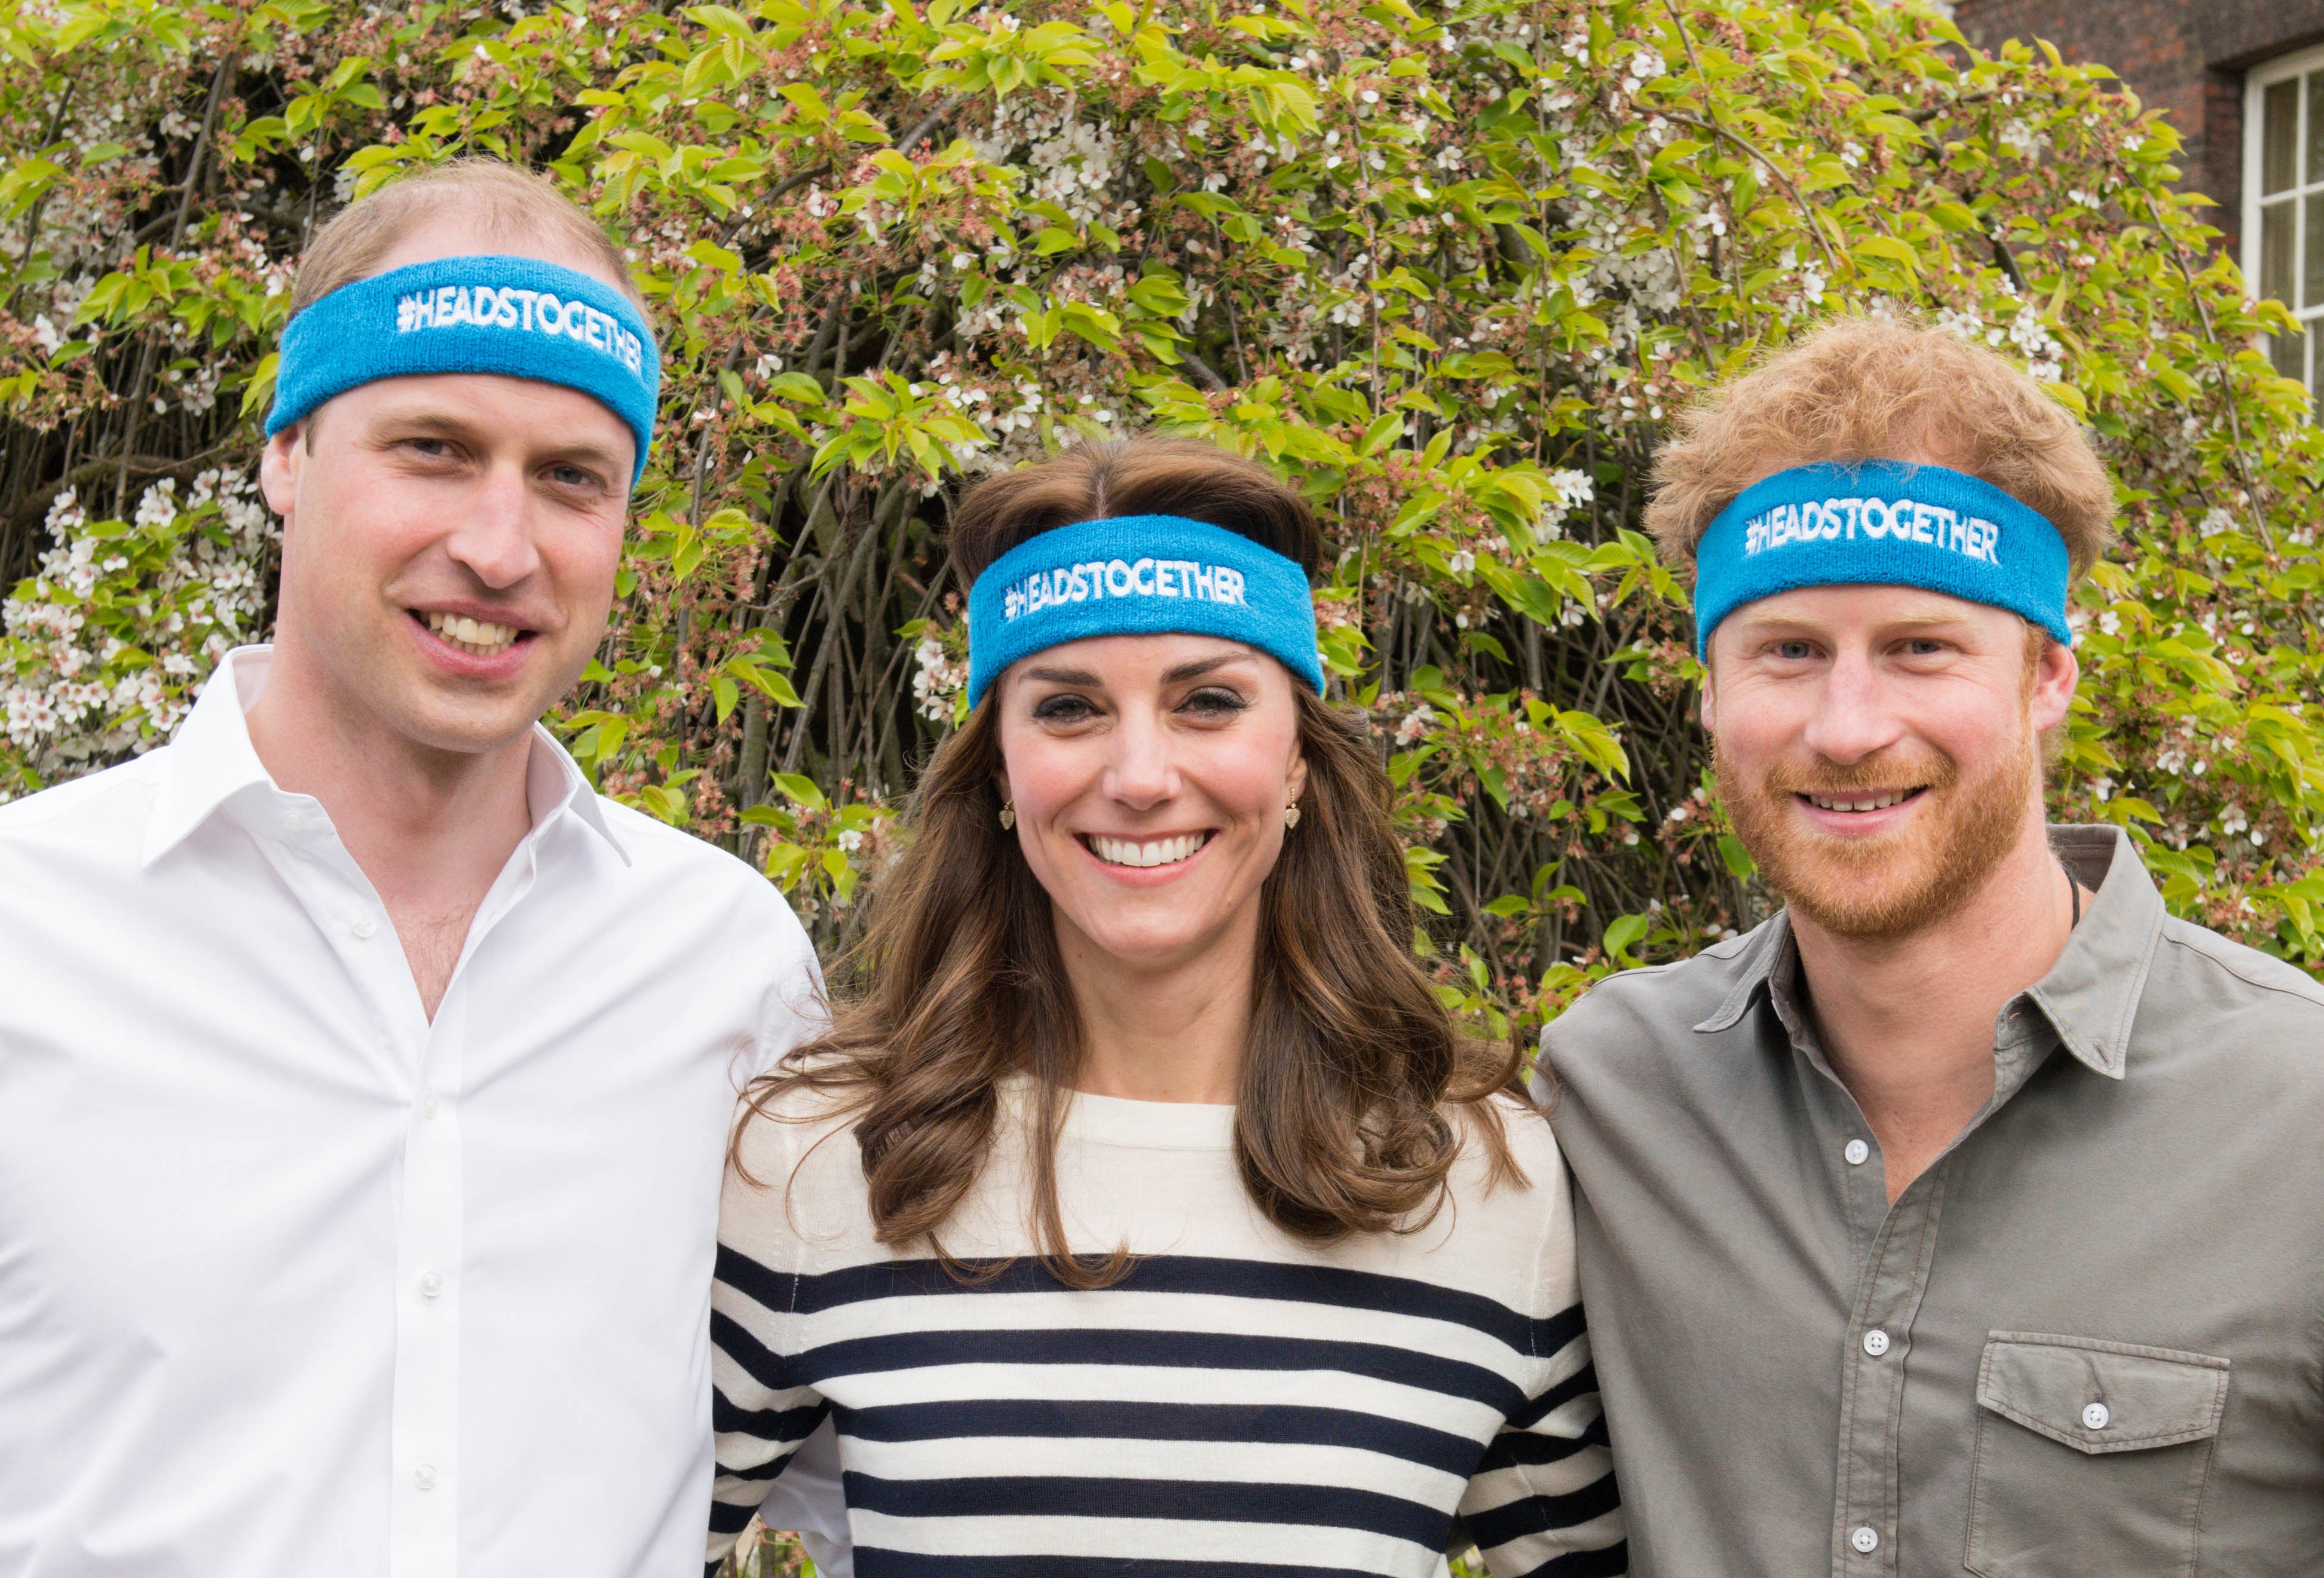 The Duke and Duchess of Cambridge and Prince Harry promoting a new campaign called Heads Together at Kensington Palace on April 21, 2016 in London, England. | Source: Getty Images